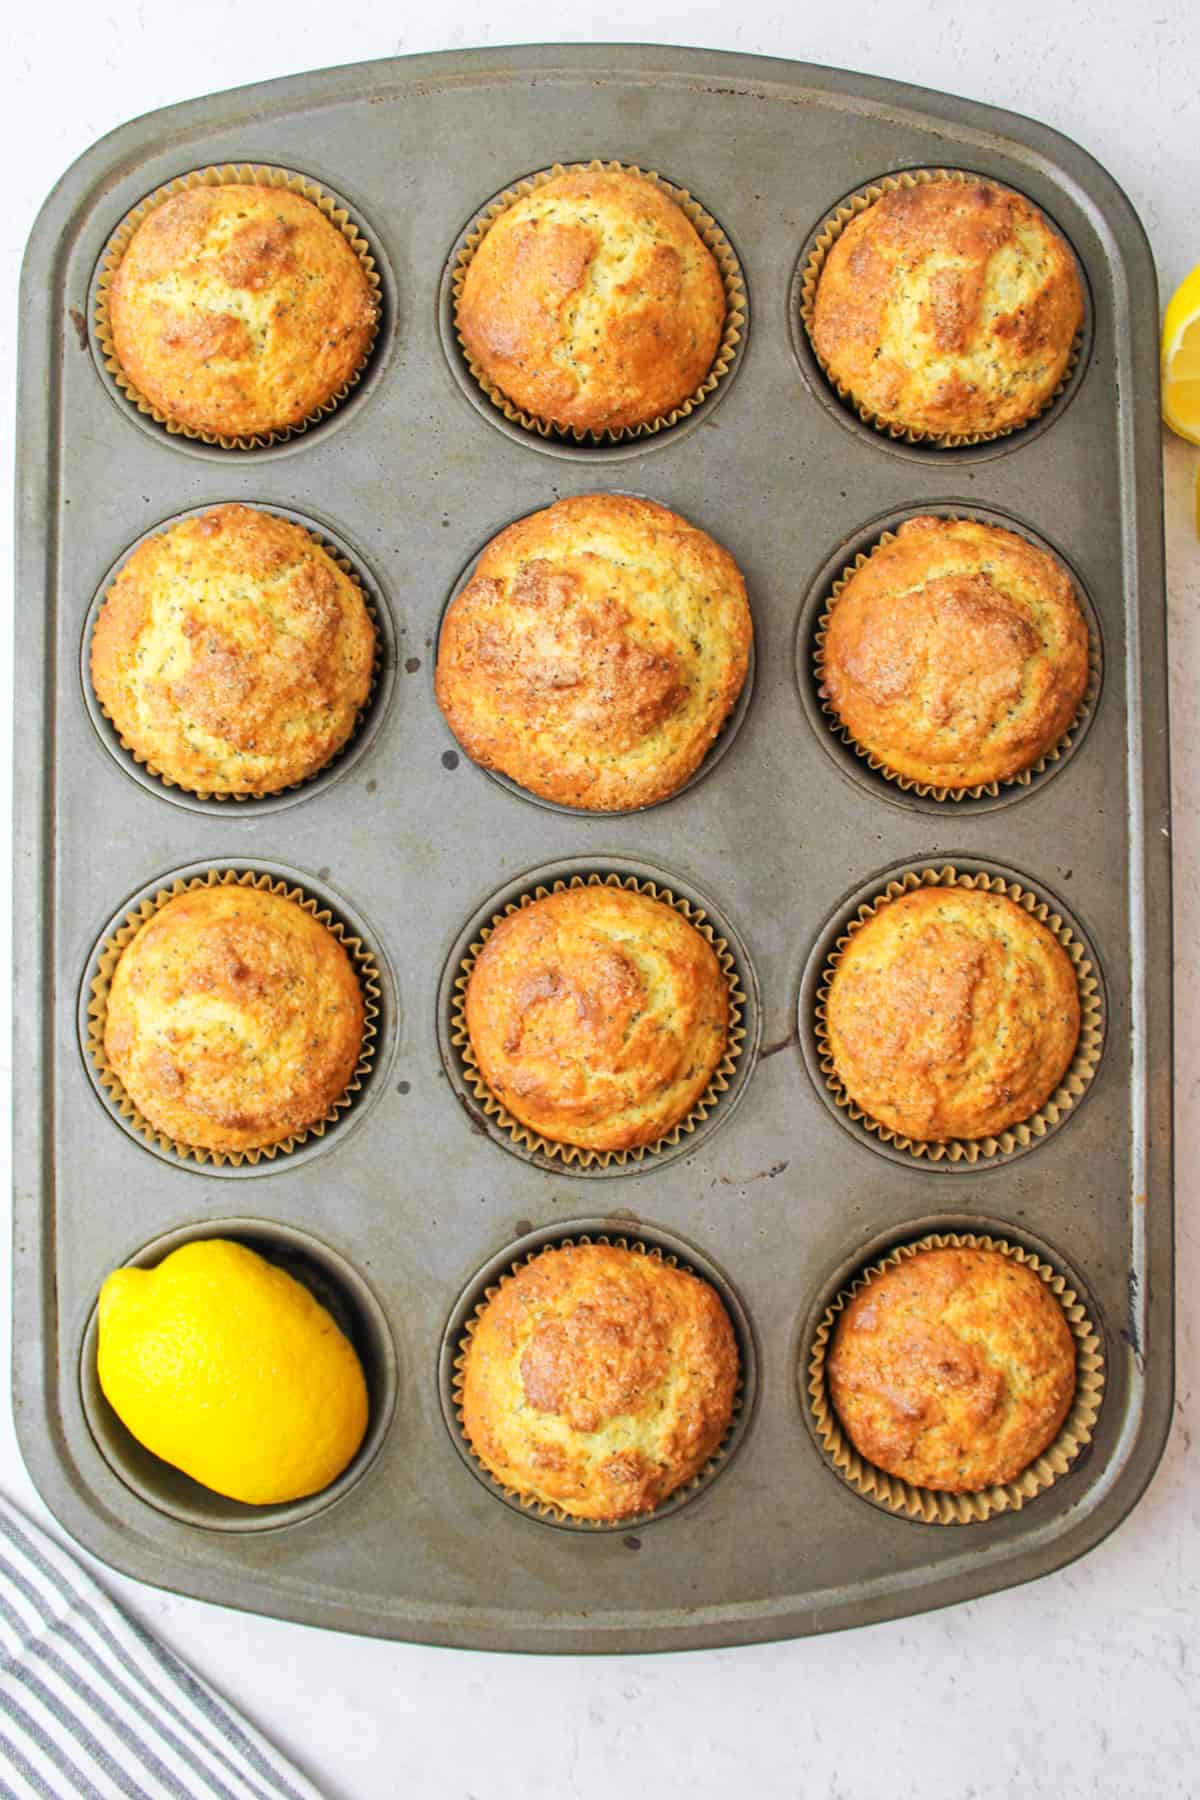 baked lemon poppy seed muffins in a muffin pan with a fresh lemon in one of the muffin spots.